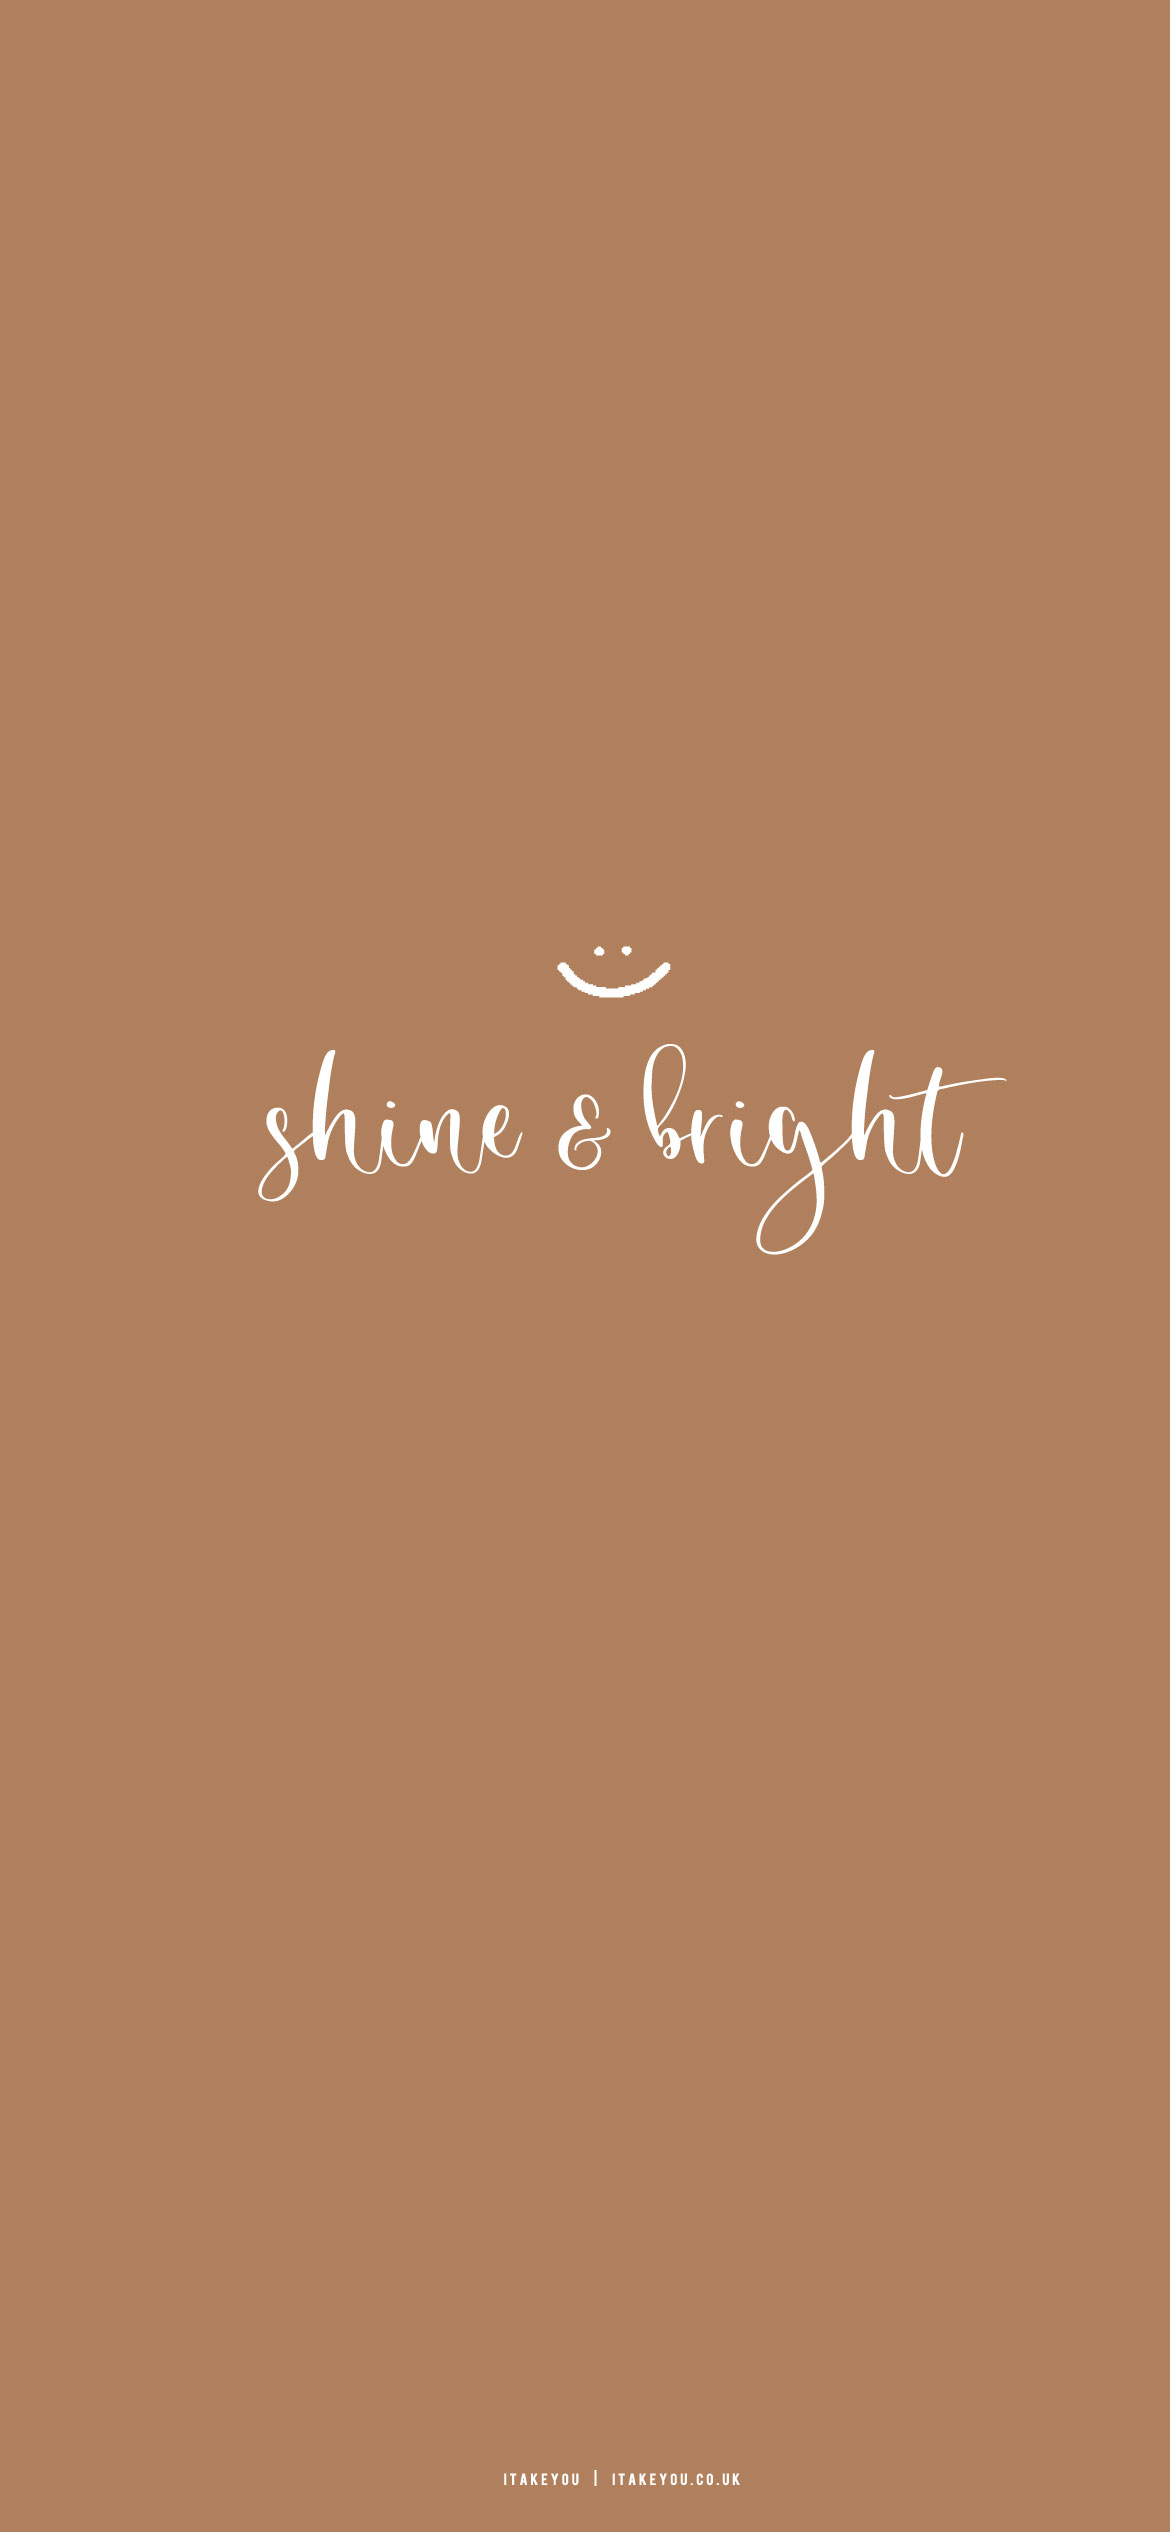 Download Aesthetic Quotes The Bright Side Wallpaper  Wallpaperscom